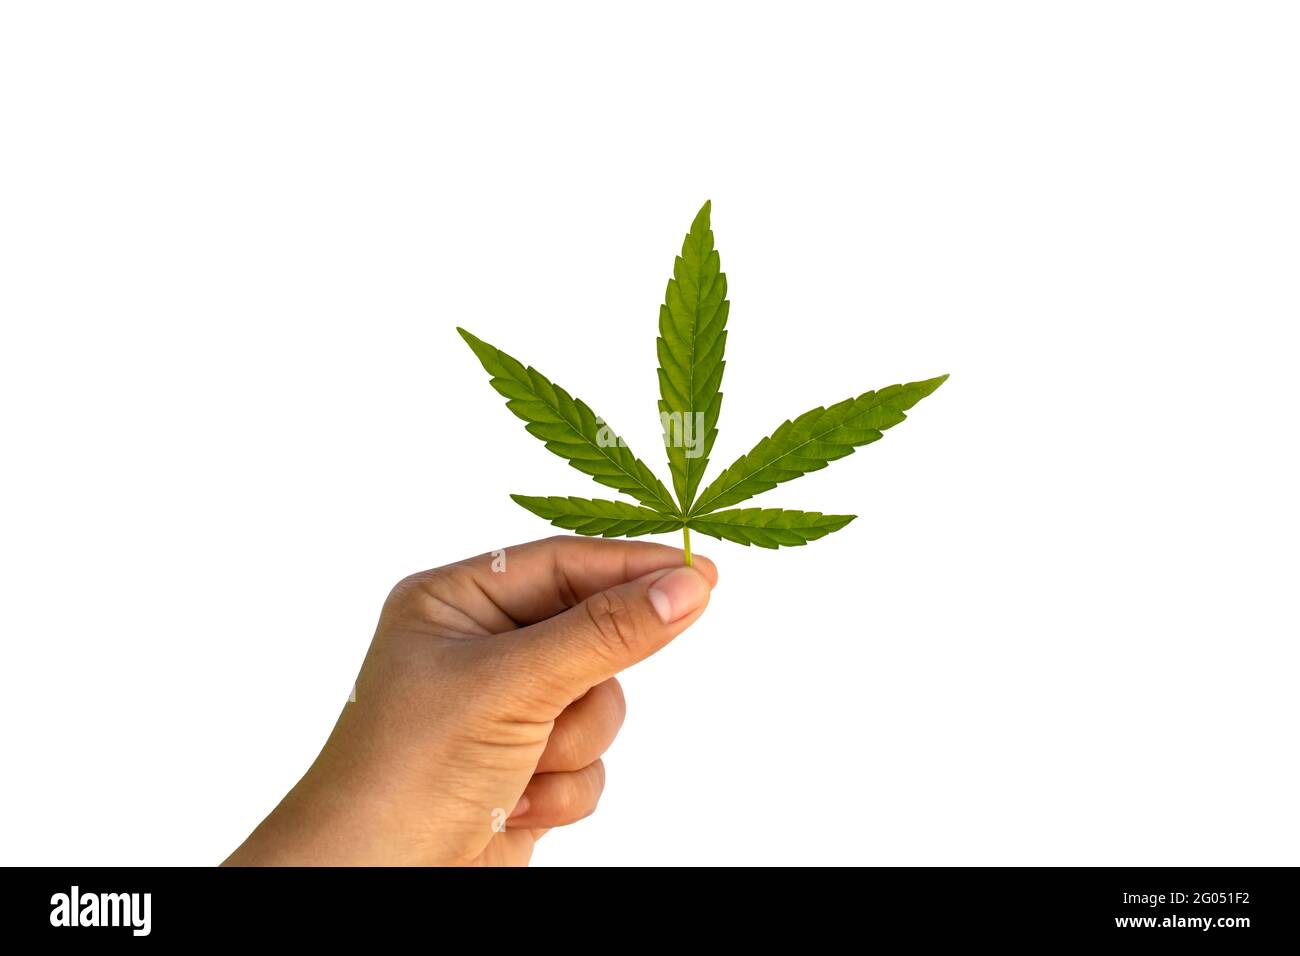 The green leaves of cannabis are in hand isolated on white background with the clipping path. Concept of using cannabis for medical benefit. Stock Photo